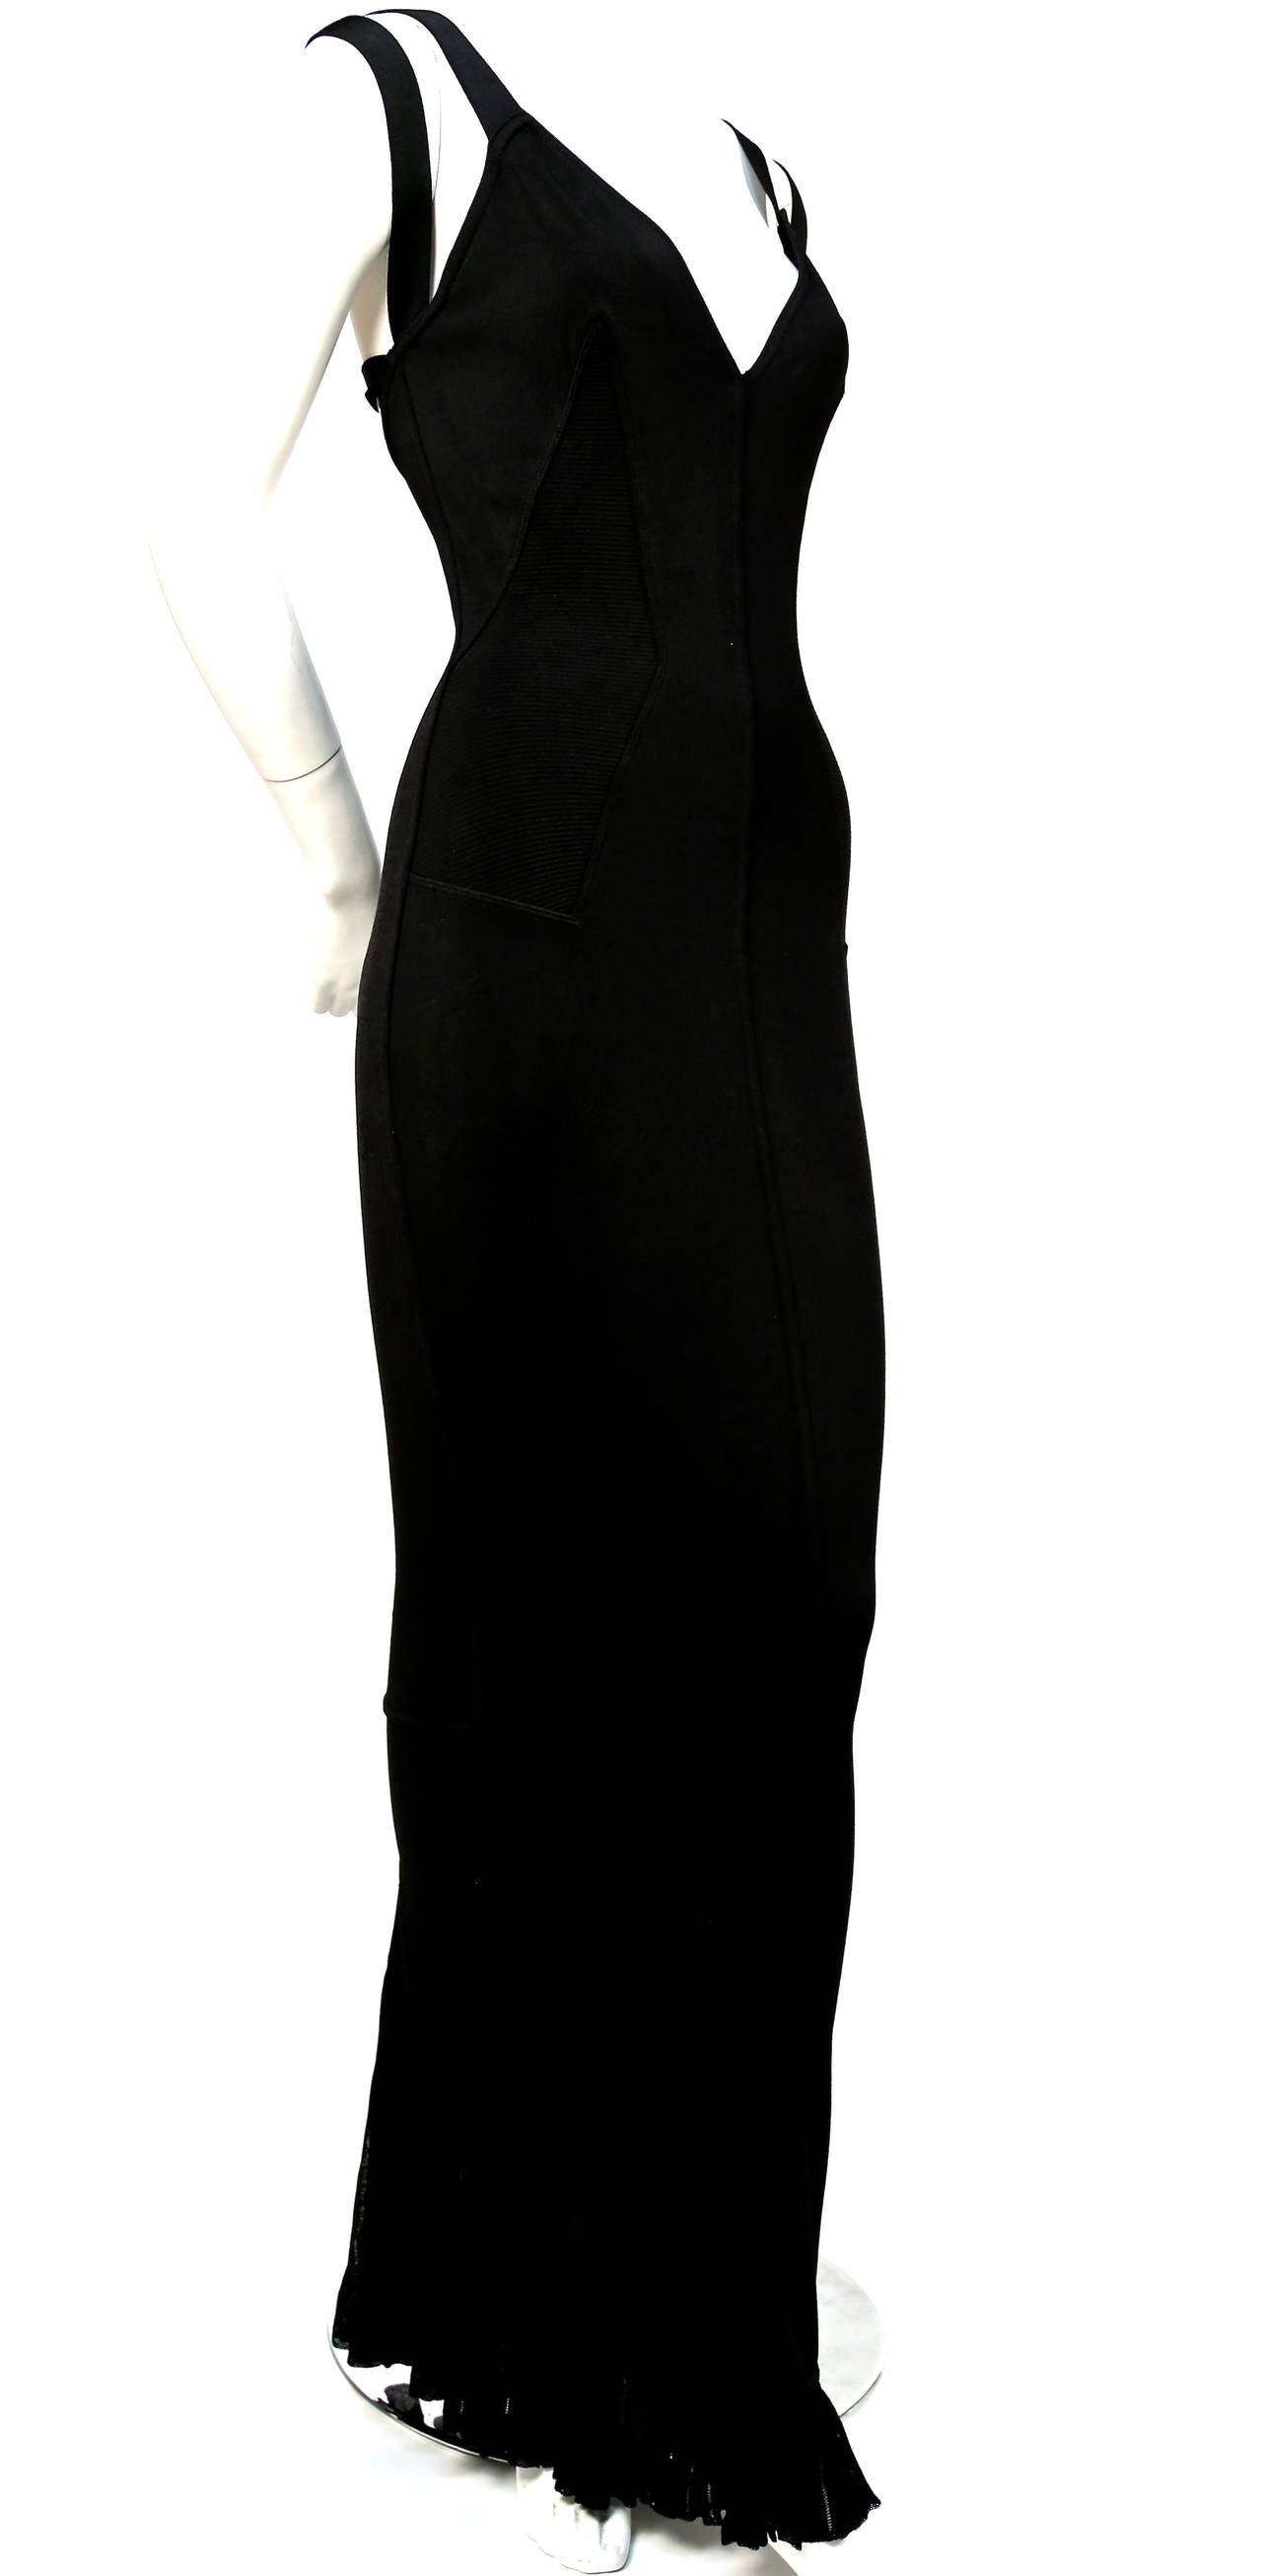 Very rare jet black long dress with pleated fishtail hemline from Azzedine Alaia dating to 1990. Size 'S'. Approximate measurements: bust 29